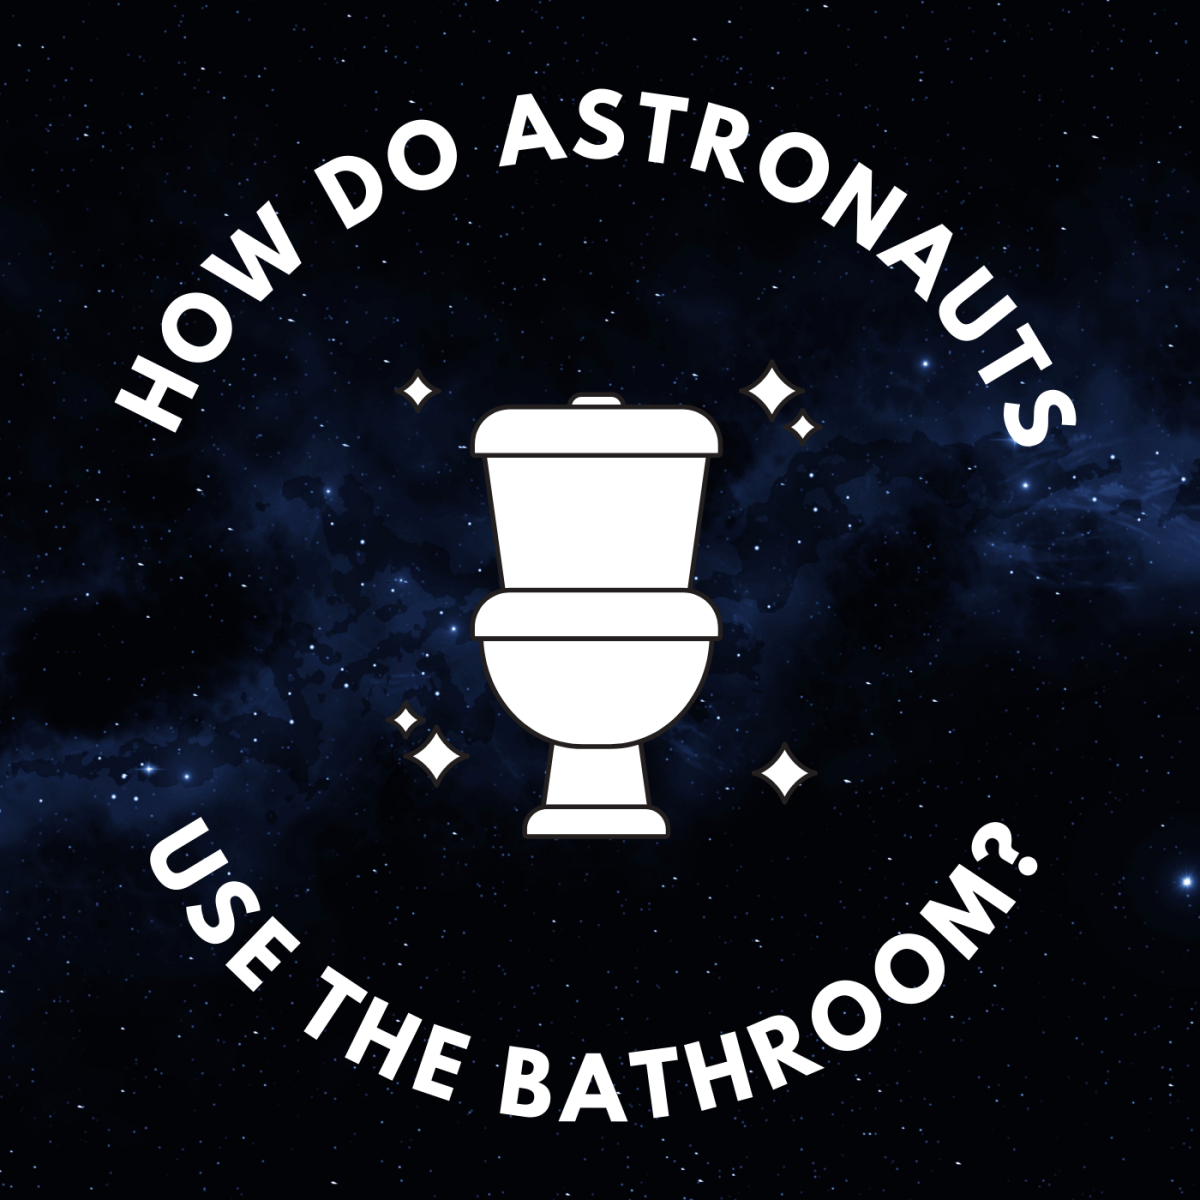 How Do Astronauts Go to the Bathroom in Space?